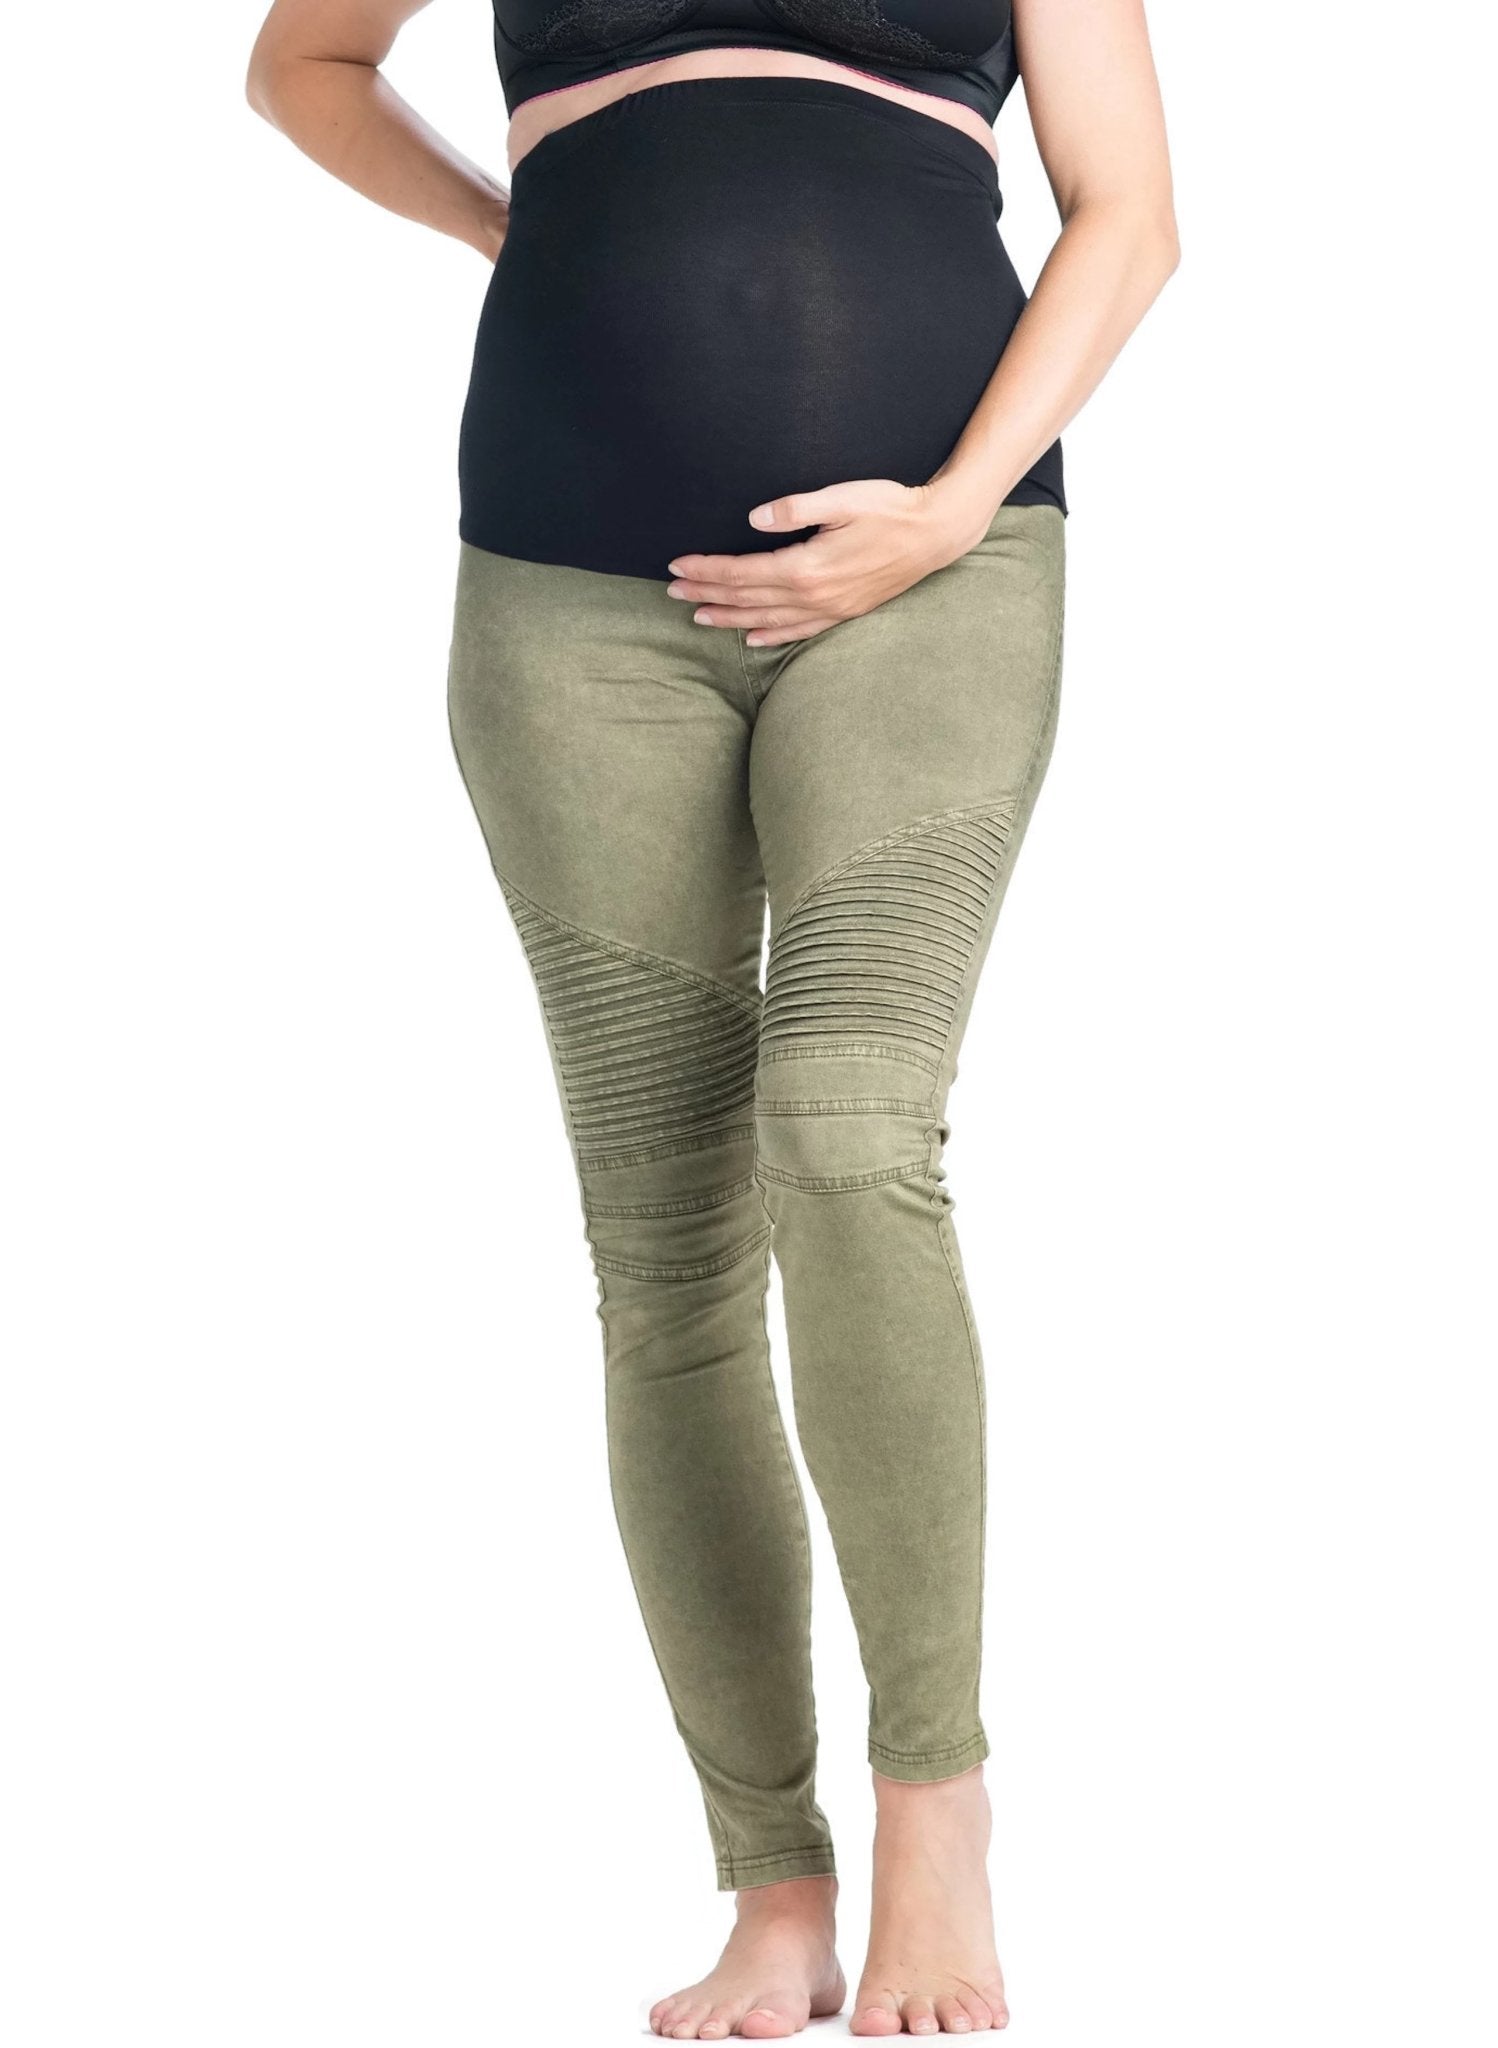 Green With Envy Moto Maternity Leggings - Mums and Bumps